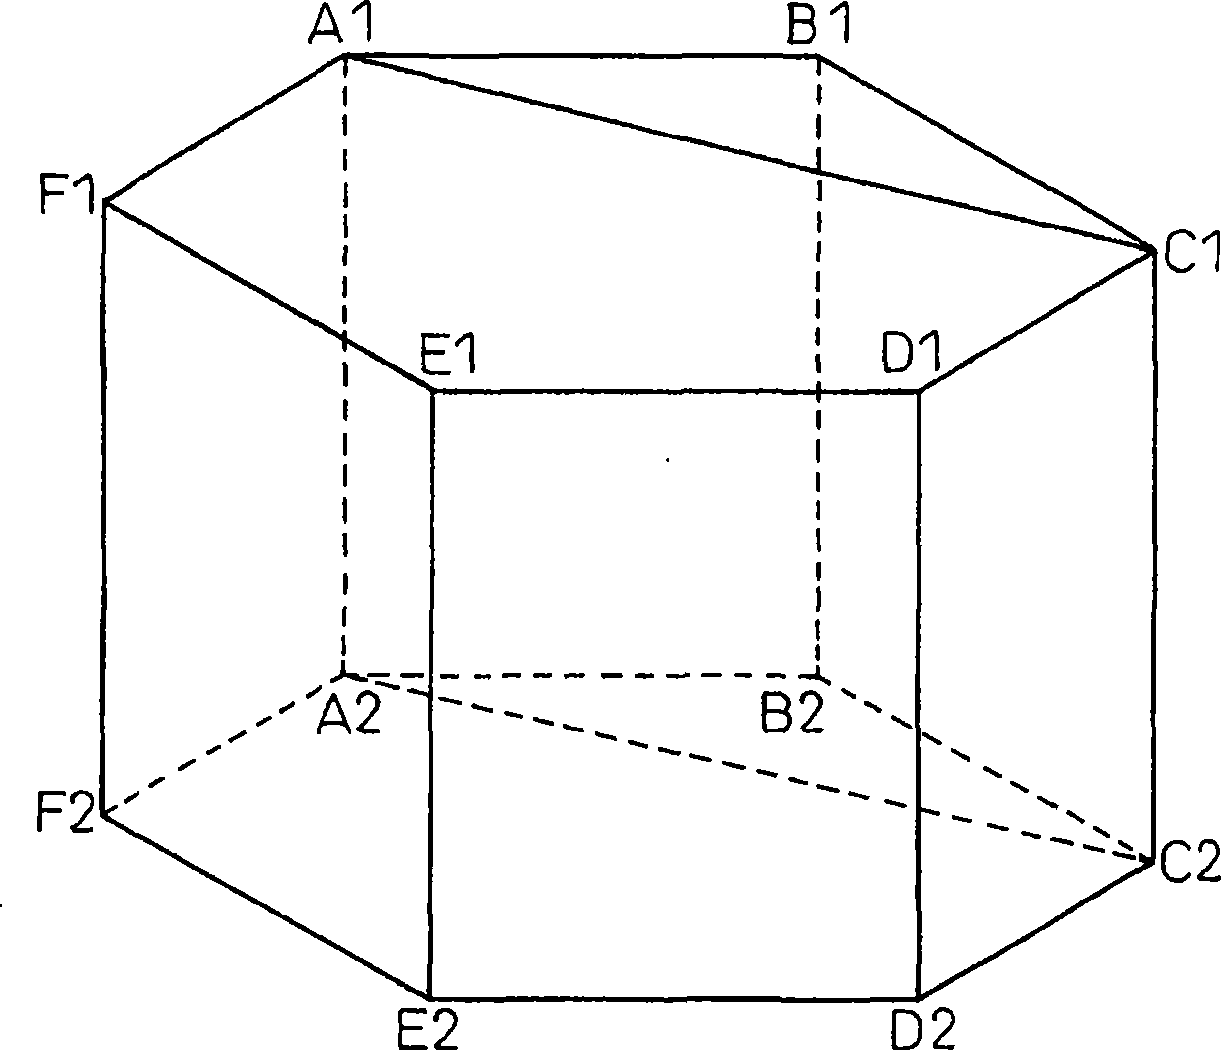 Process for producing SiC single crystal